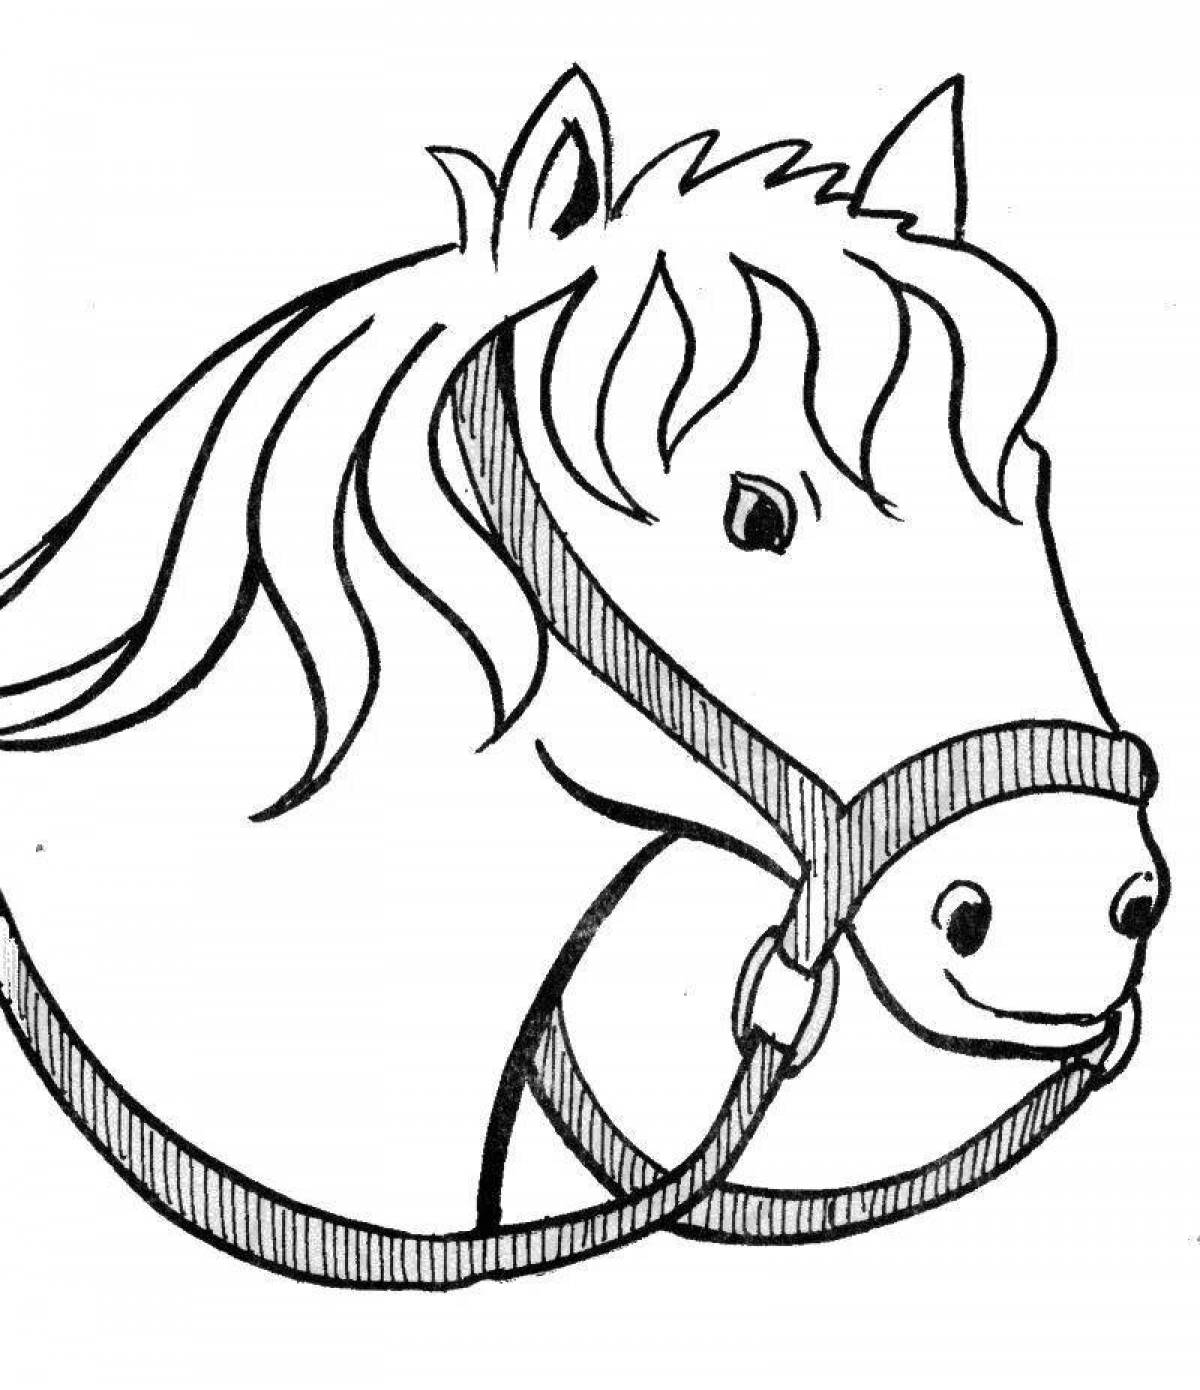 Luminous horse head coloring page